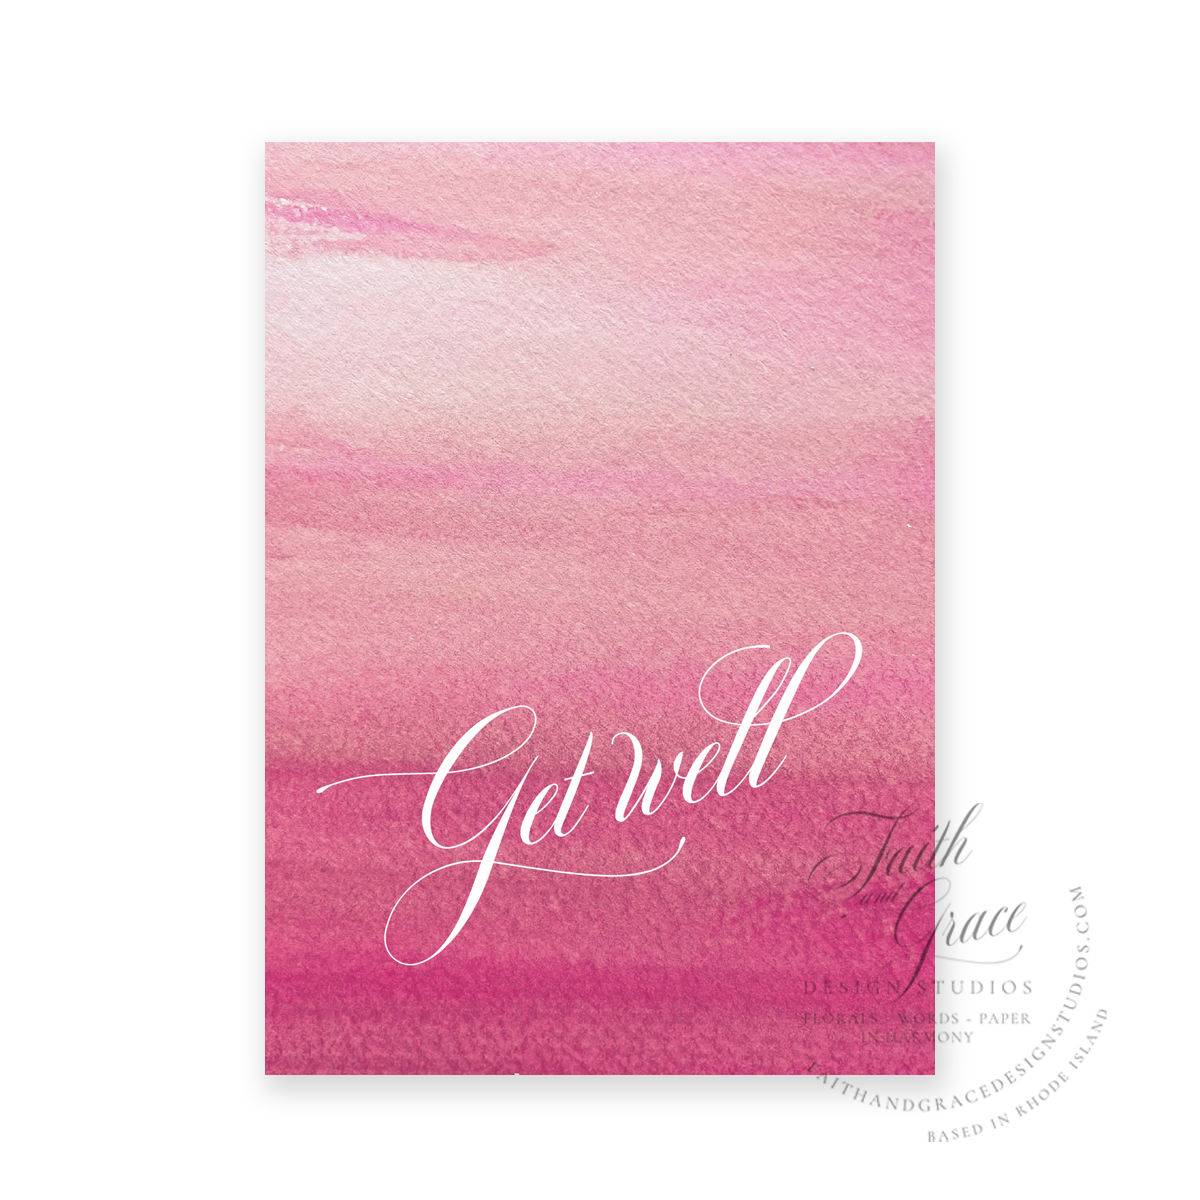 Get well in script on pink watercolor painting Religious Greeting Card